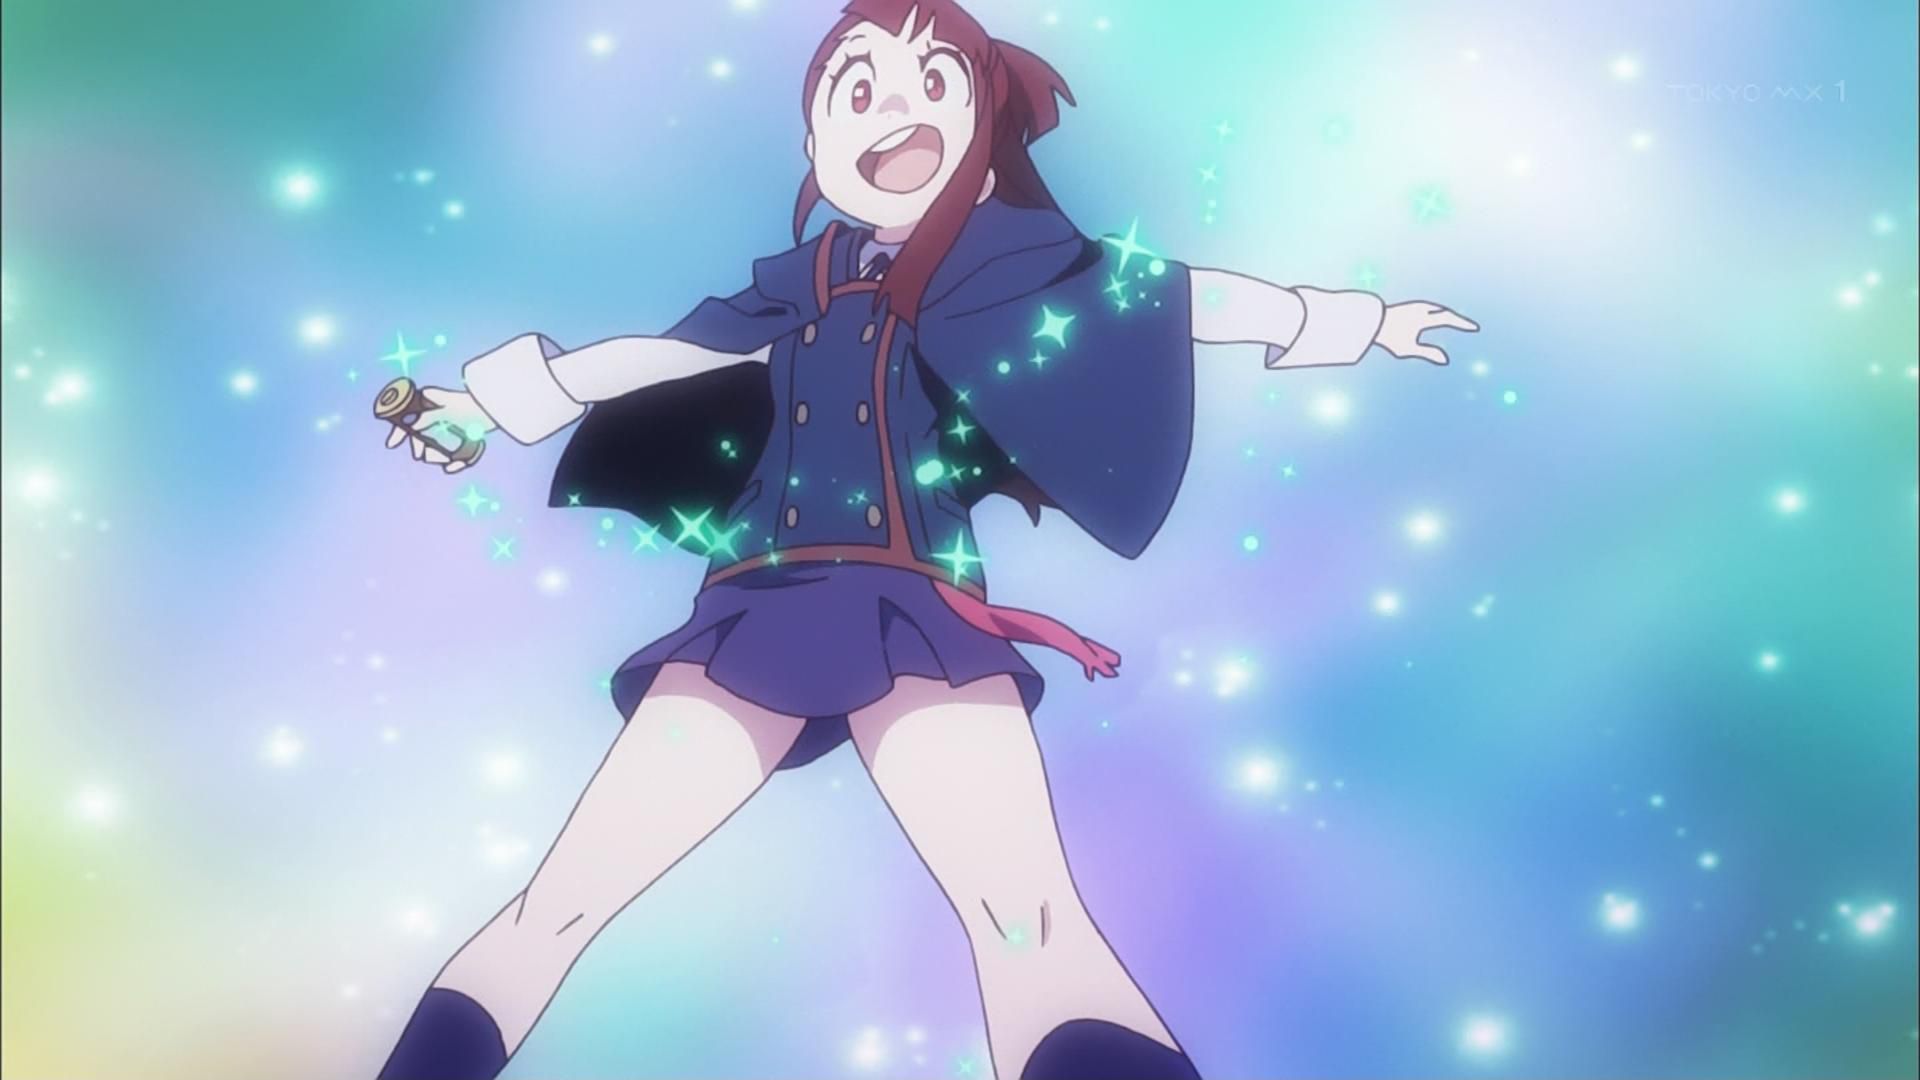 "Little witch academia, 9 stories, today also acre thigh dinner we did! 5